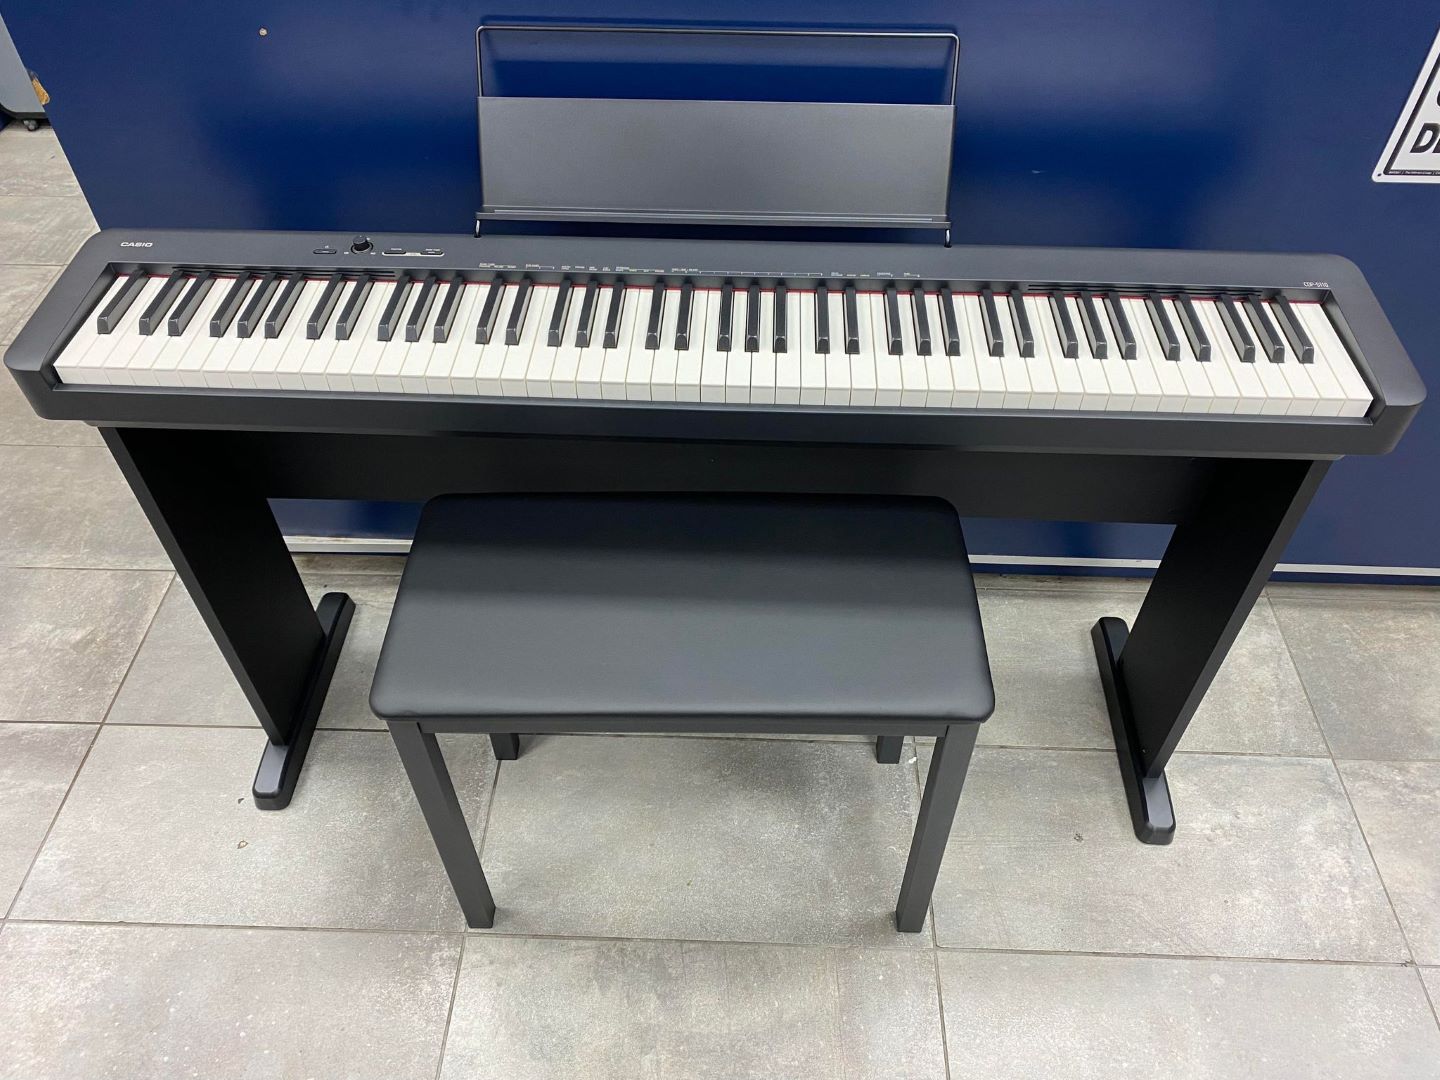 Pianos 88 touches: Clavier PIANO Casio CDP-S110BK 88 touches